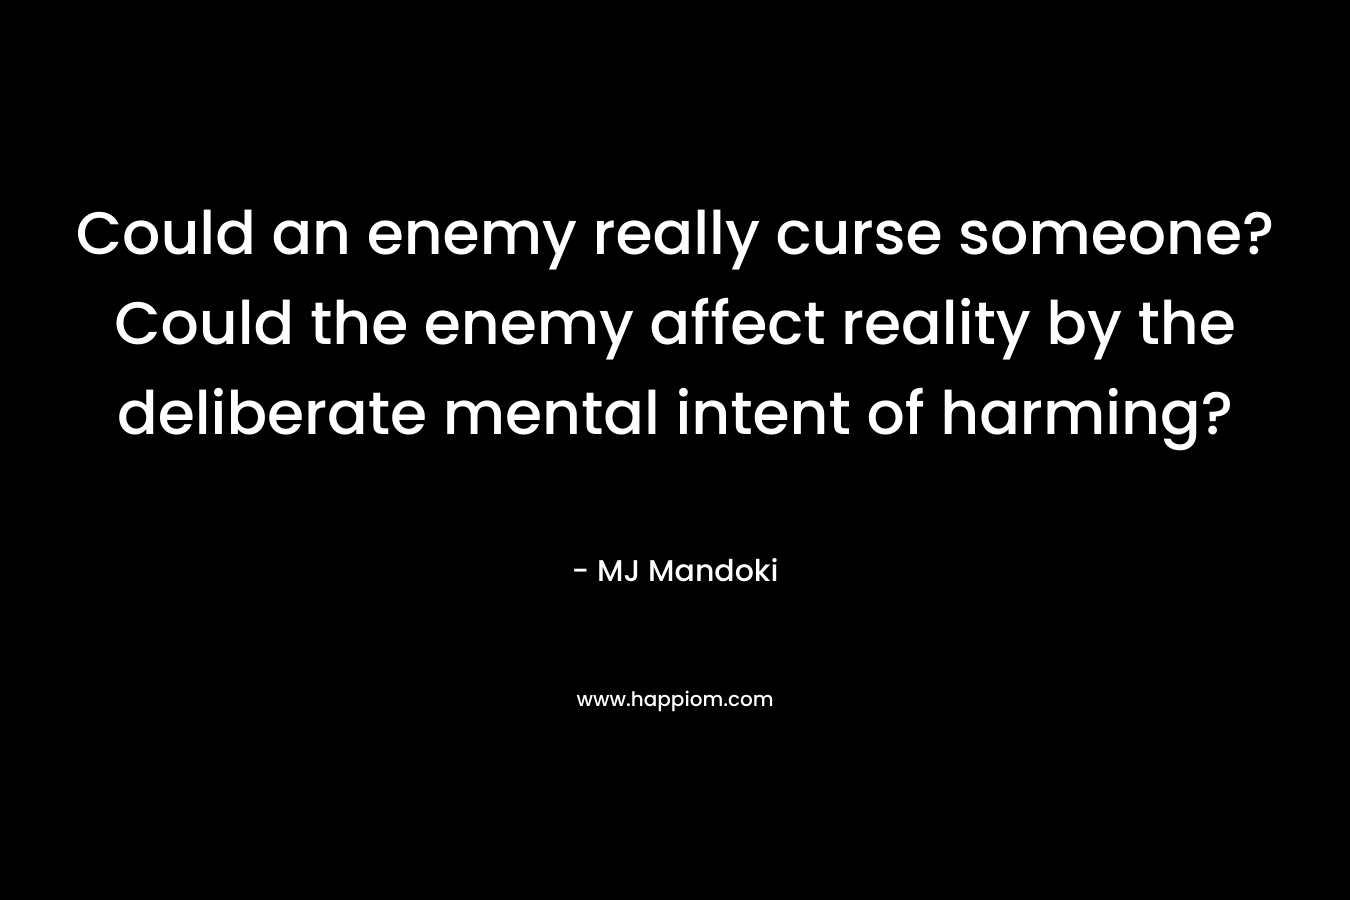 Could an enemy really curse someone? Could the enemy affect reality by the deliberate mental intent of harming? – MJ Mandoki